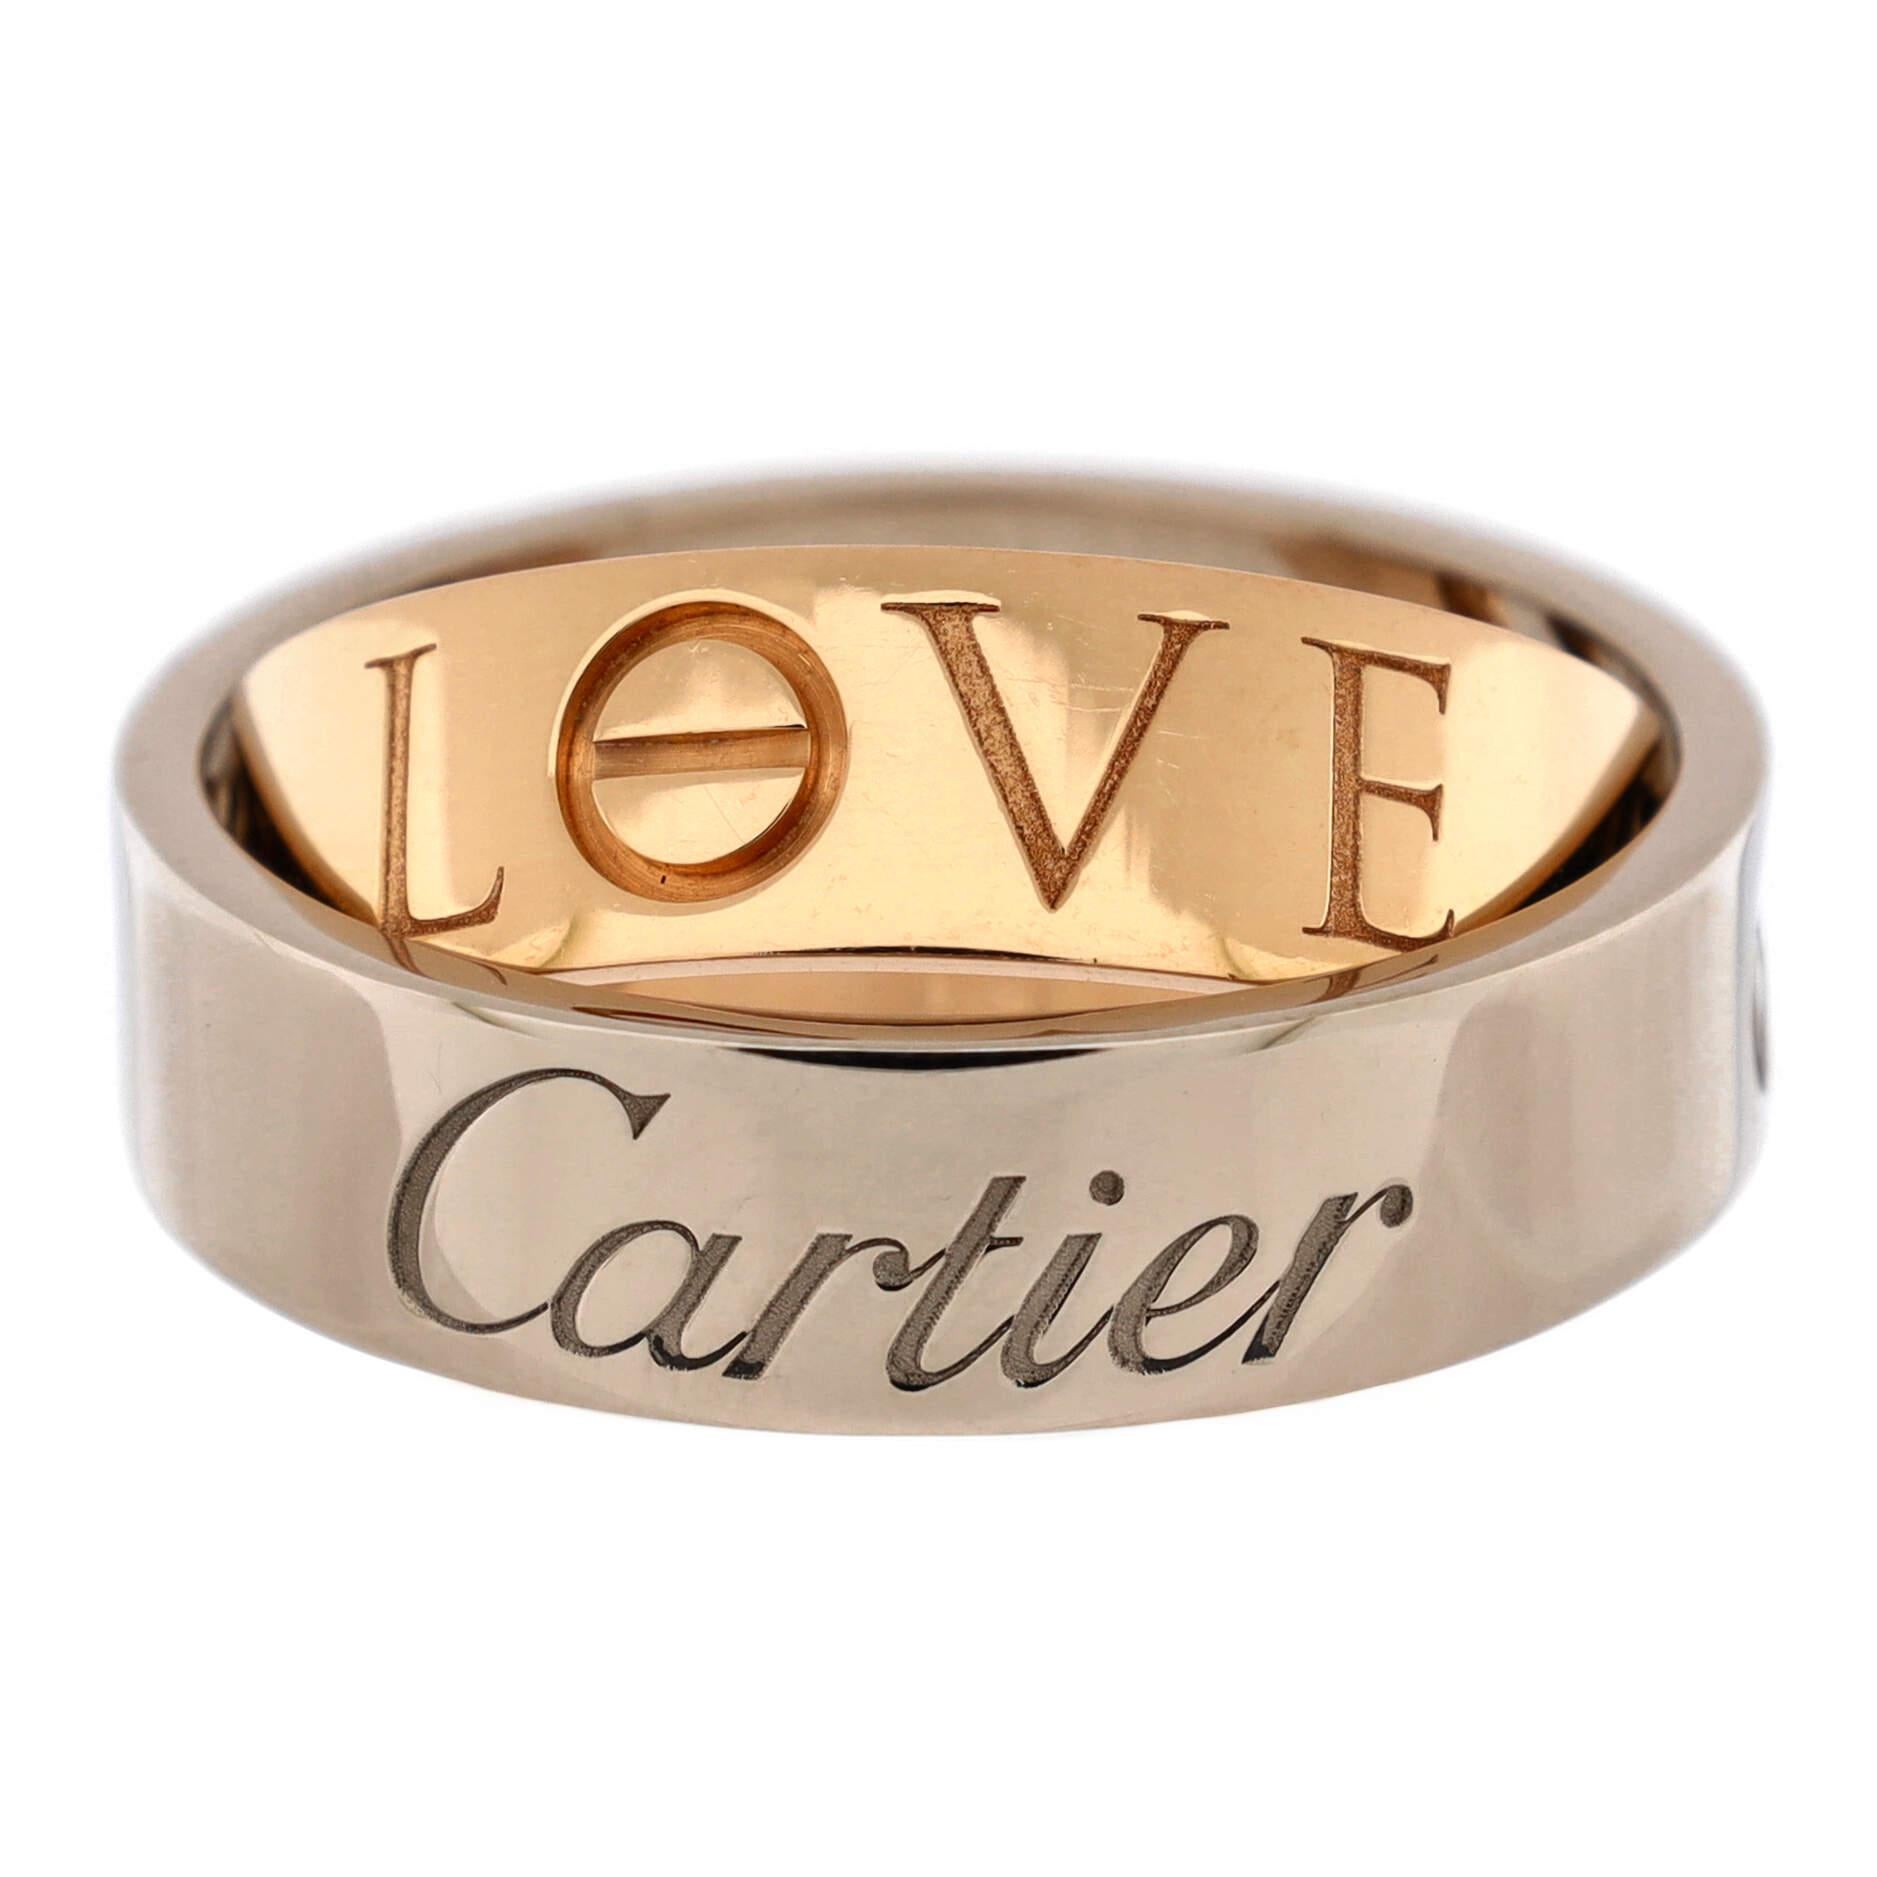 Condition: Great. Minor wear and re-polish throughout.
Accessories: No Accessories
Measurements: Size: 6 - 52, Width: 5.80 mm
Designer: Cartier
Model: Astro LOVE Ring 18K White Gold and 18K Rose Gold
Exterior Color: Rose Gold, White Gold
Item